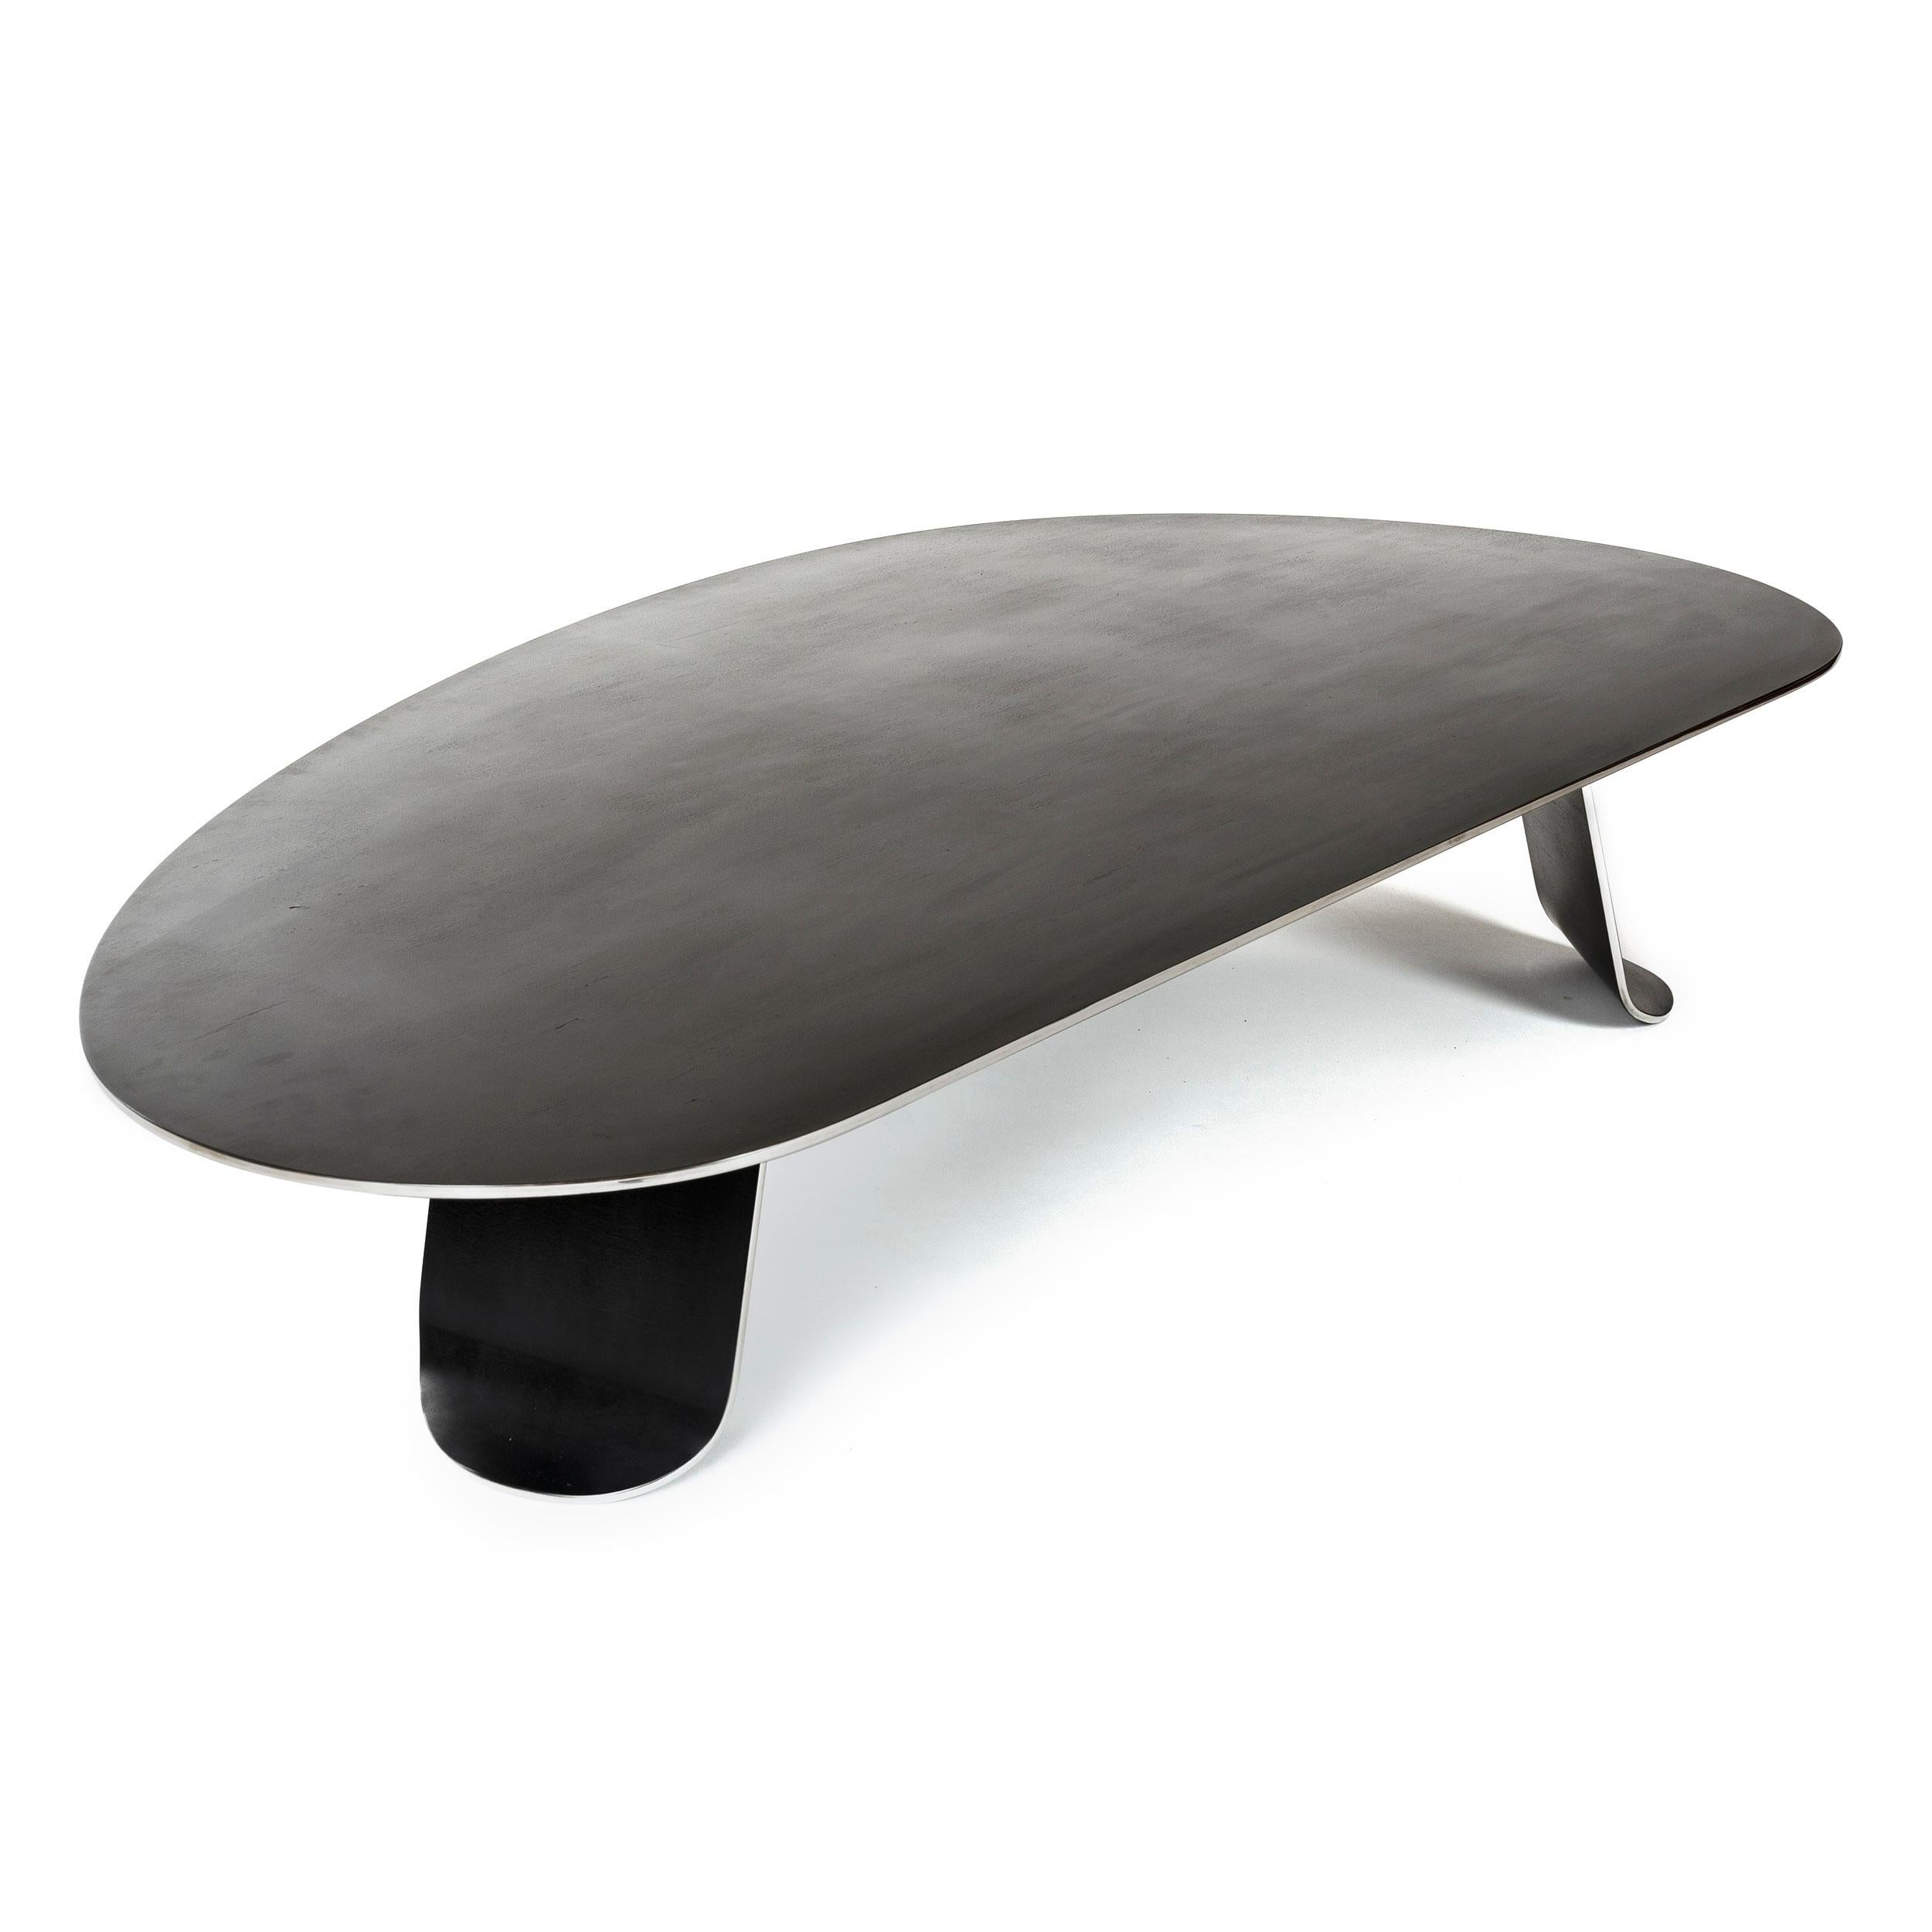 Wyeth Chrysalis Table No. 1 in Blackened Stainless Steel with Polished Edges For Sale 1